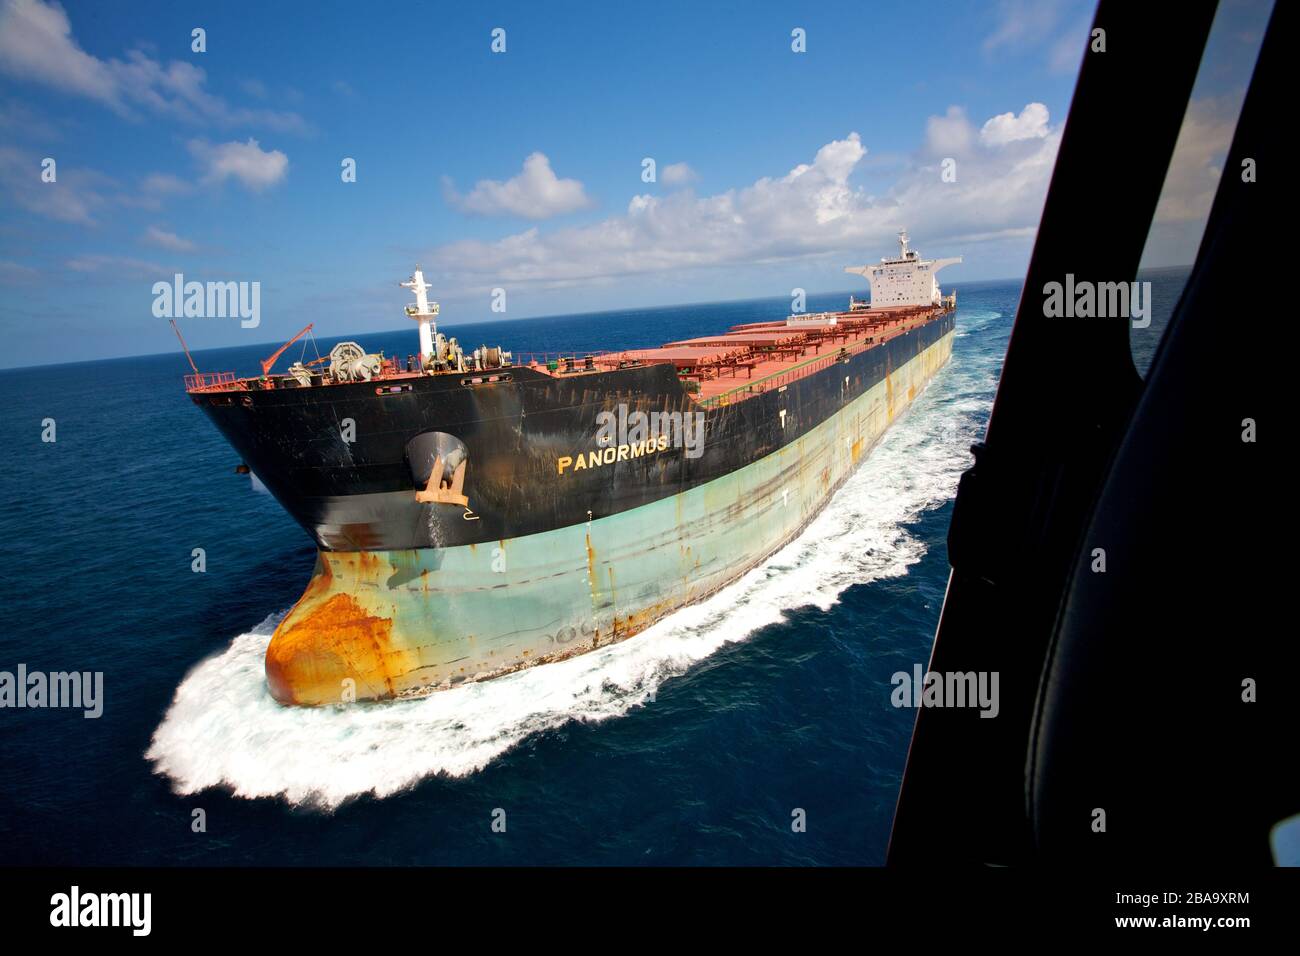 The bulk carrier Panormos travelling in the Great Barrier Reef, Australia. Stock Photo